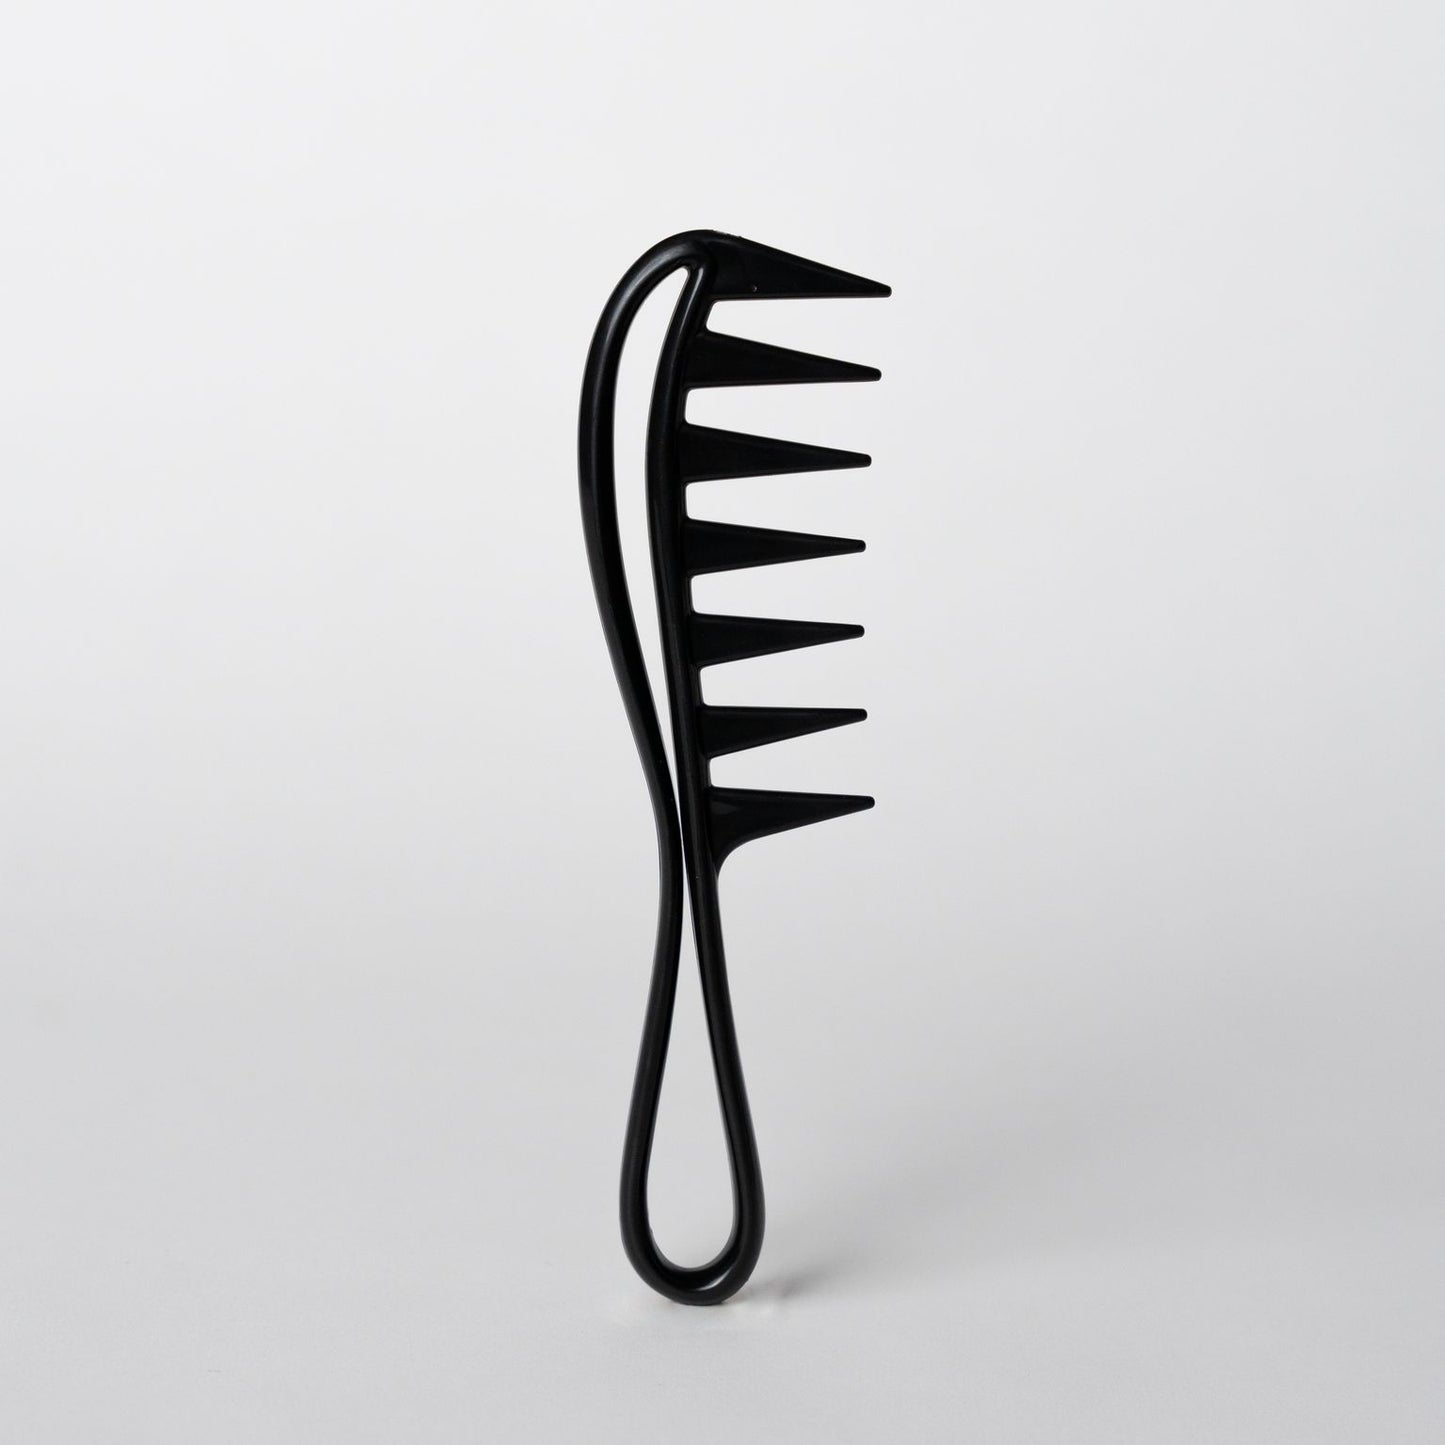 Dandymen Wide Tooth Styling Comb